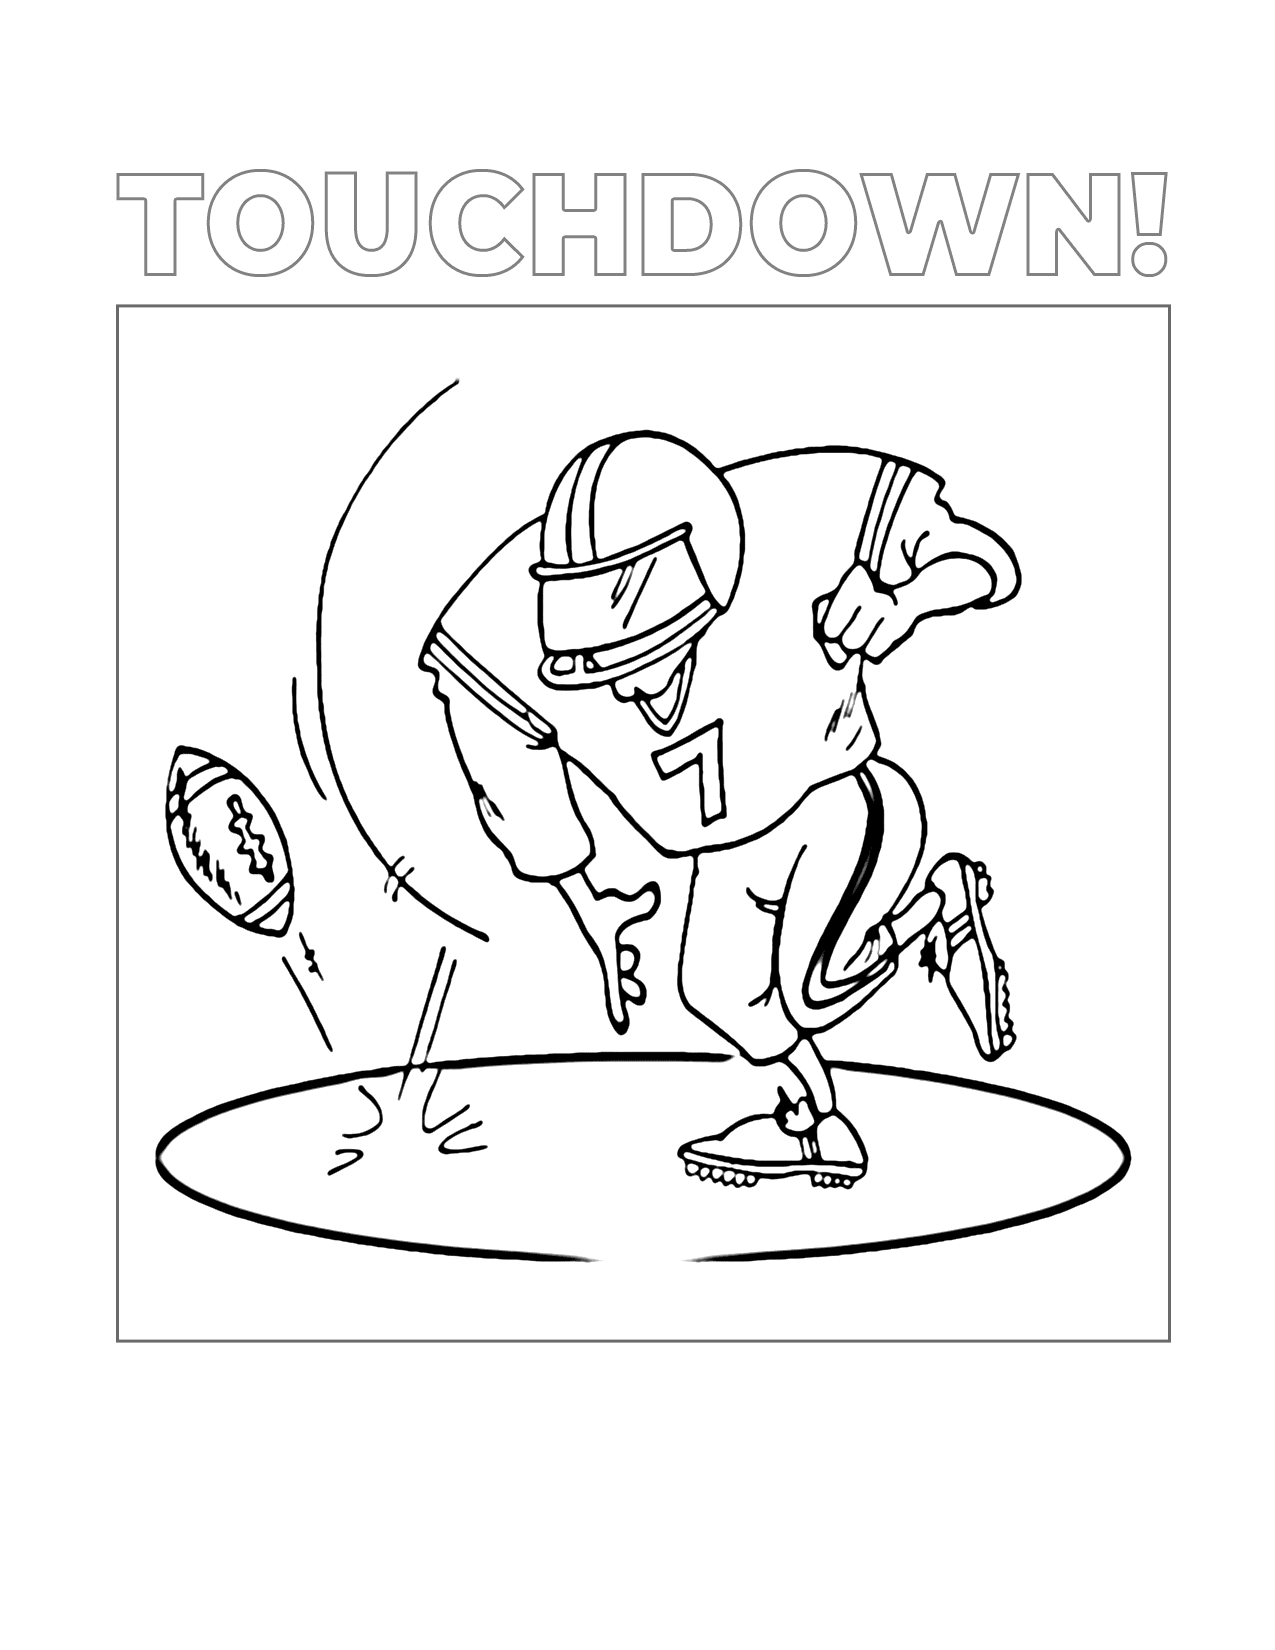 Touchdown Football Coloring Page